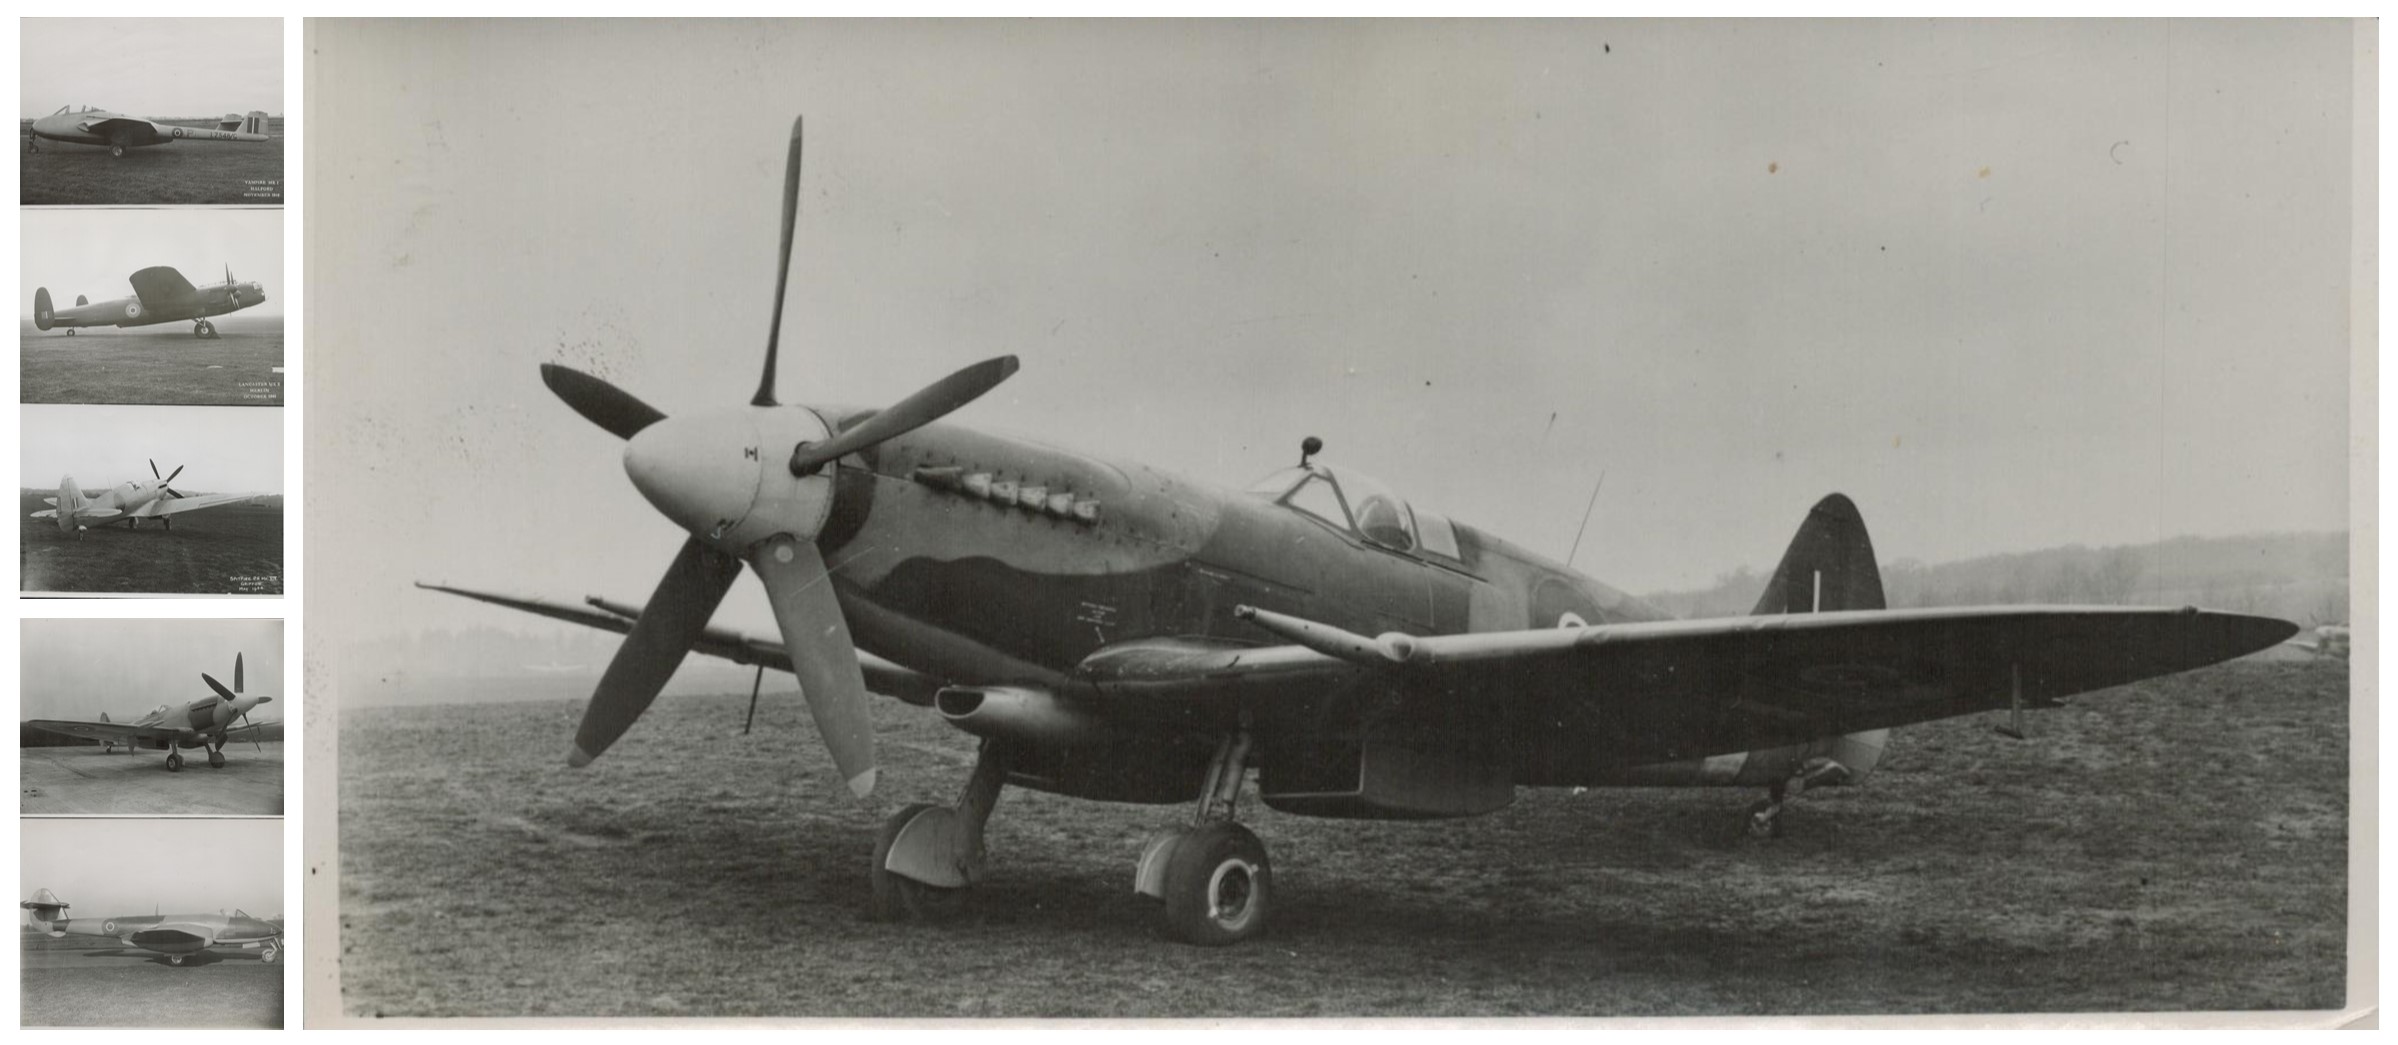 WWII Plane collection includes 6 original assorted wartime photos featuring iconic planes such as